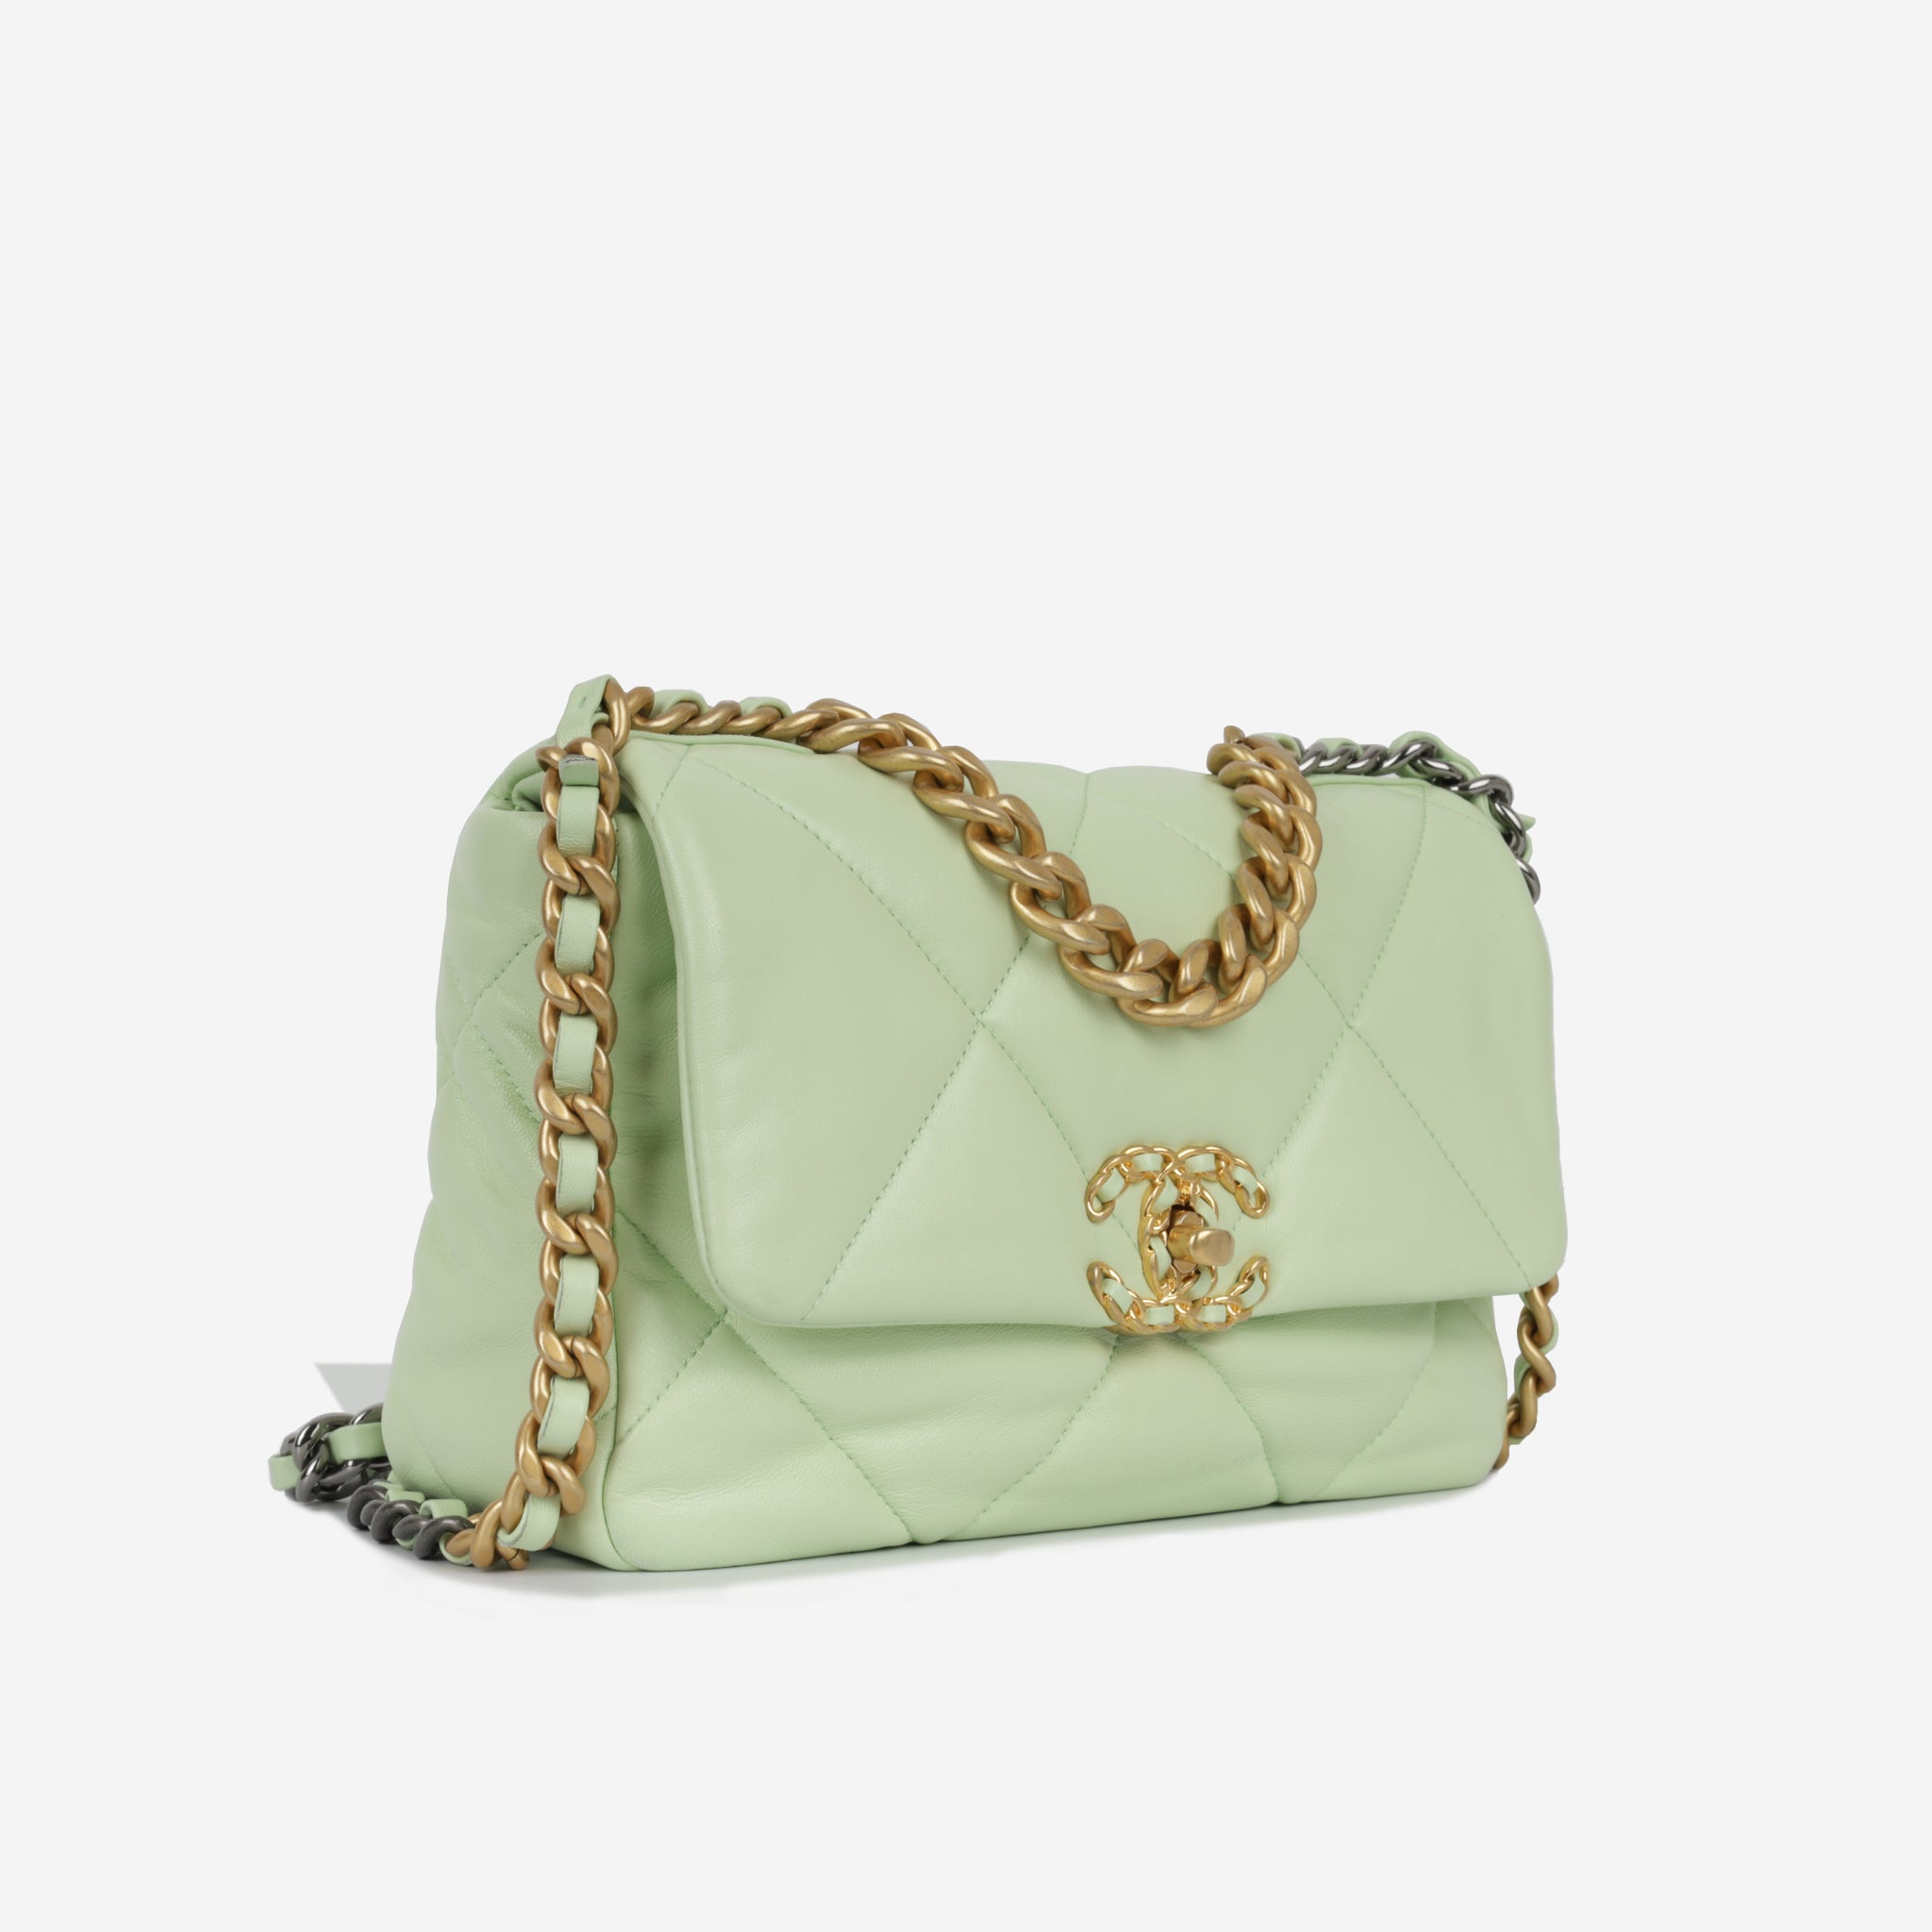 Chanel - Chanel 19 Flap Bag - Small - Mint Green Lambskin - MHW - Plaque